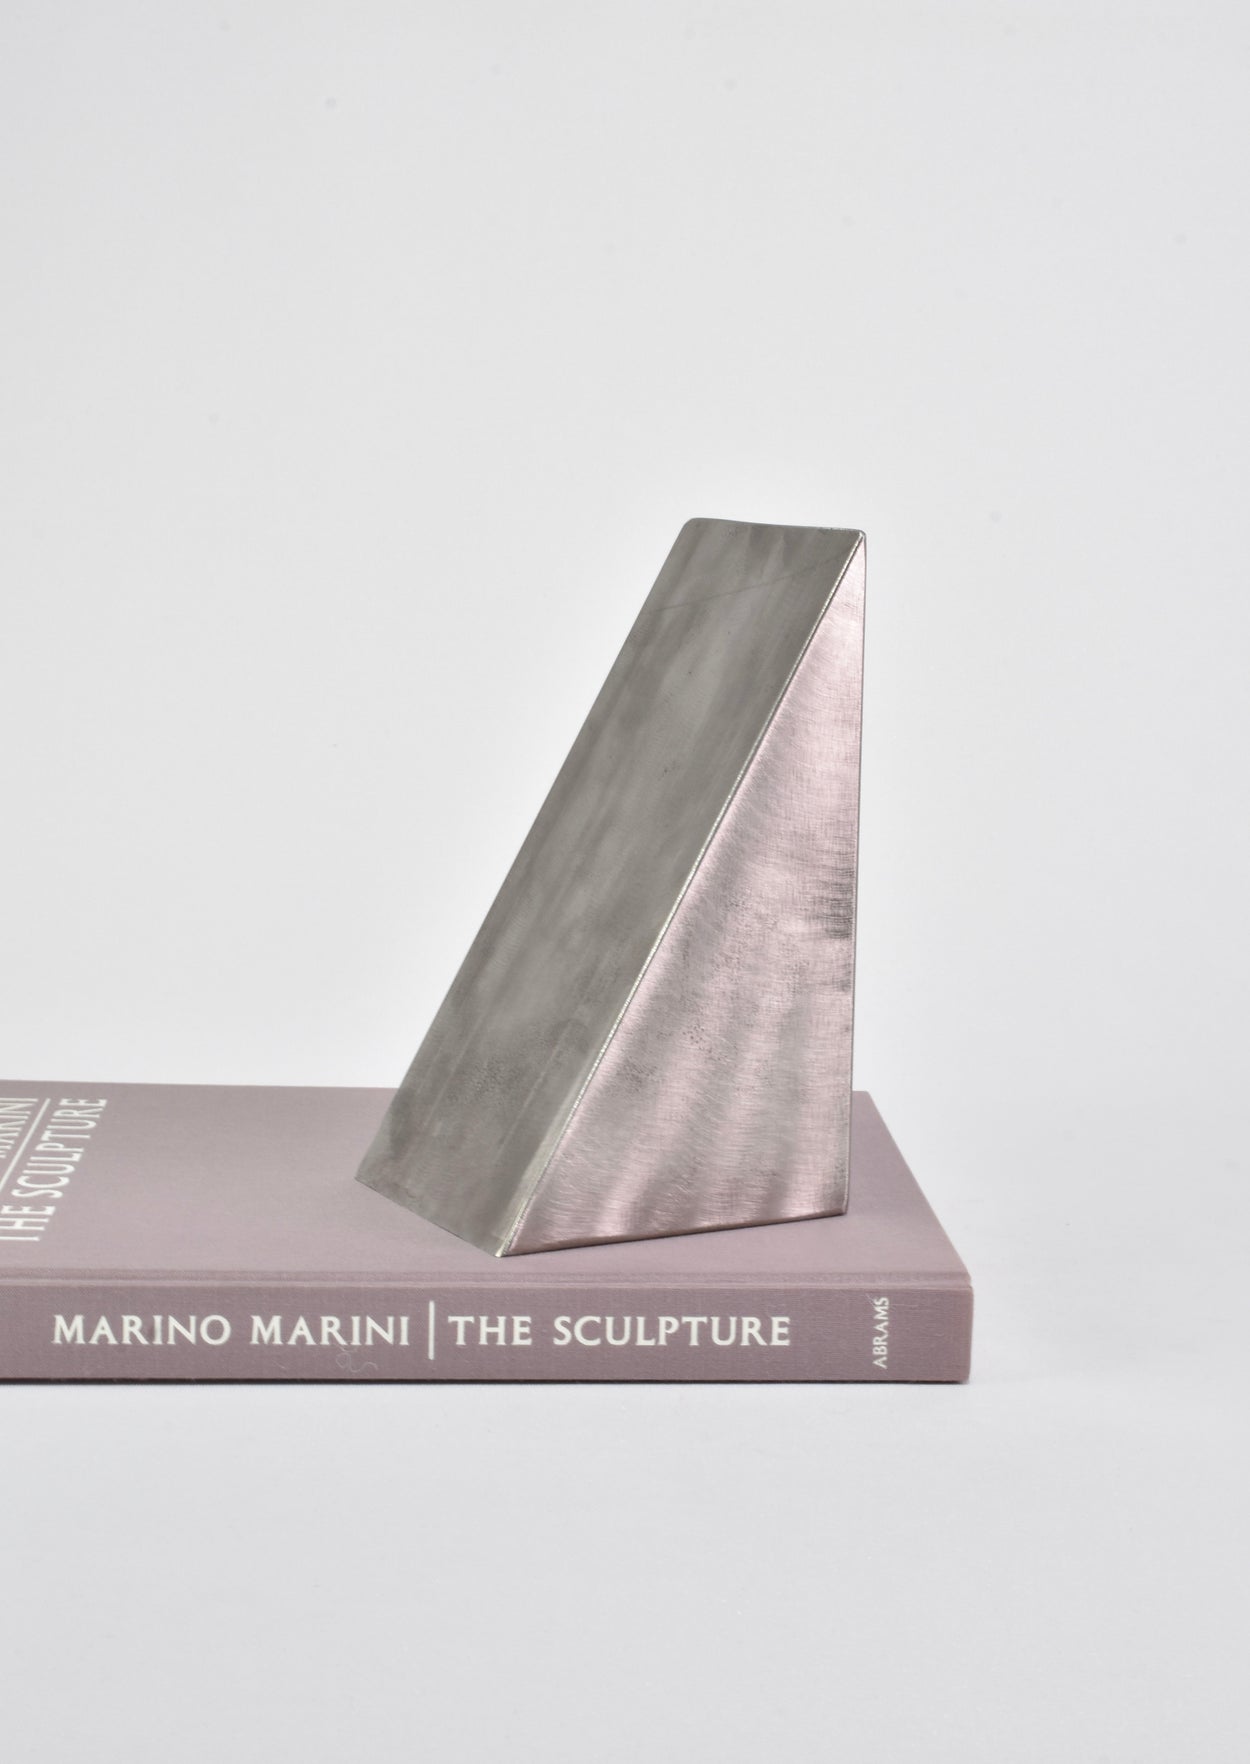 Silver Bookends